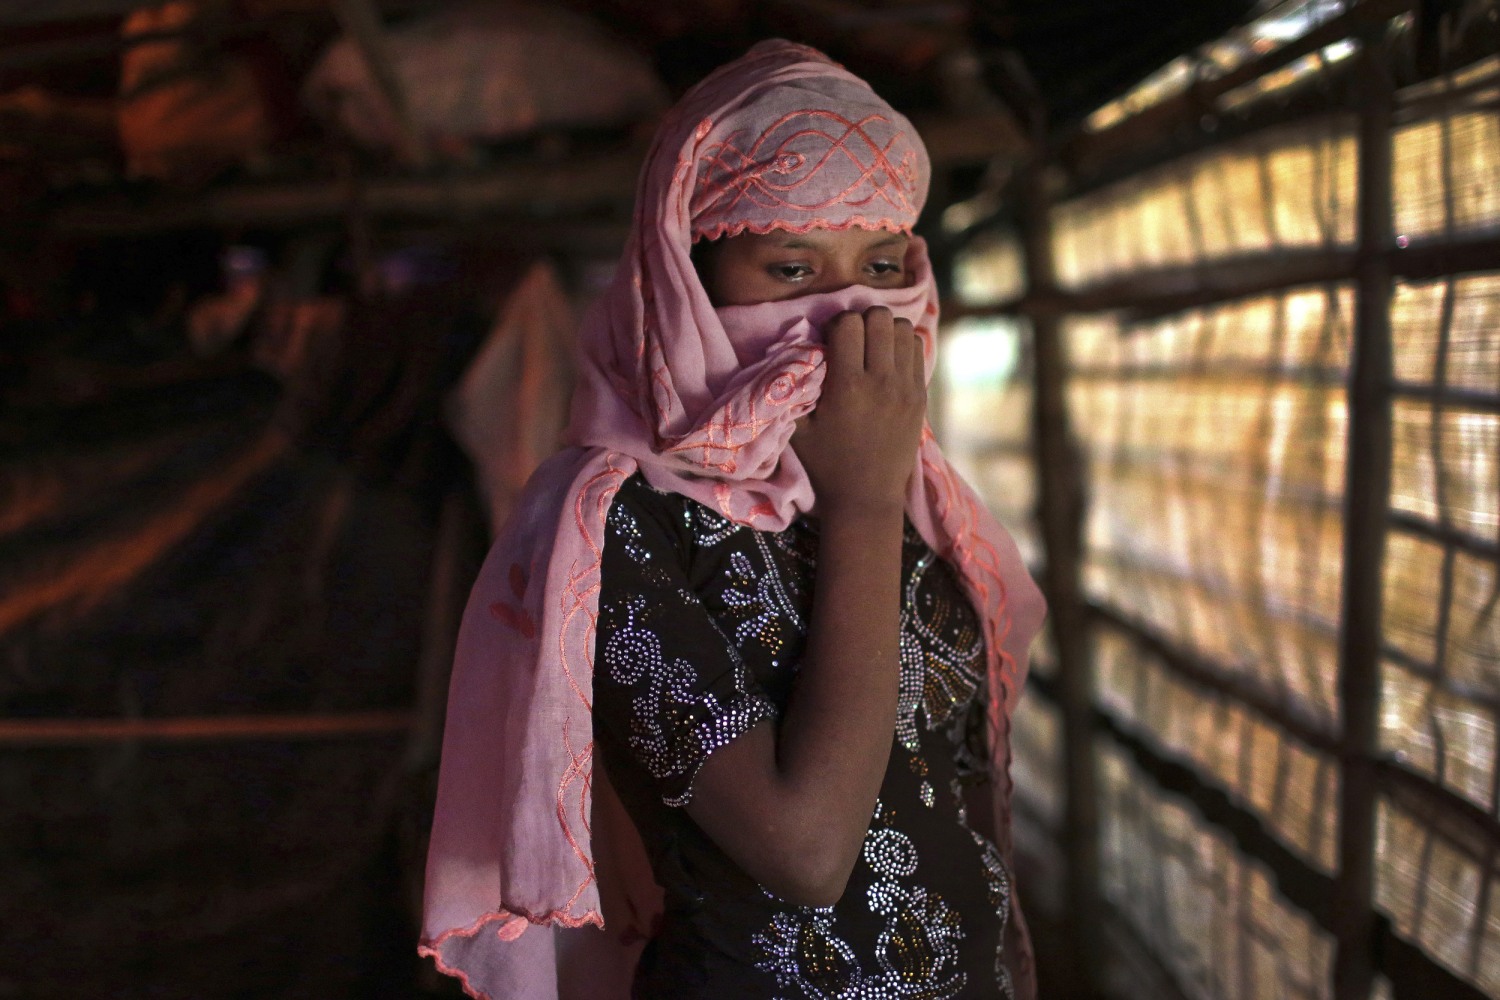 Villege Forced Sex - 21 Rohingya women detail systemic, brutal rapes by Myanmar armed forces